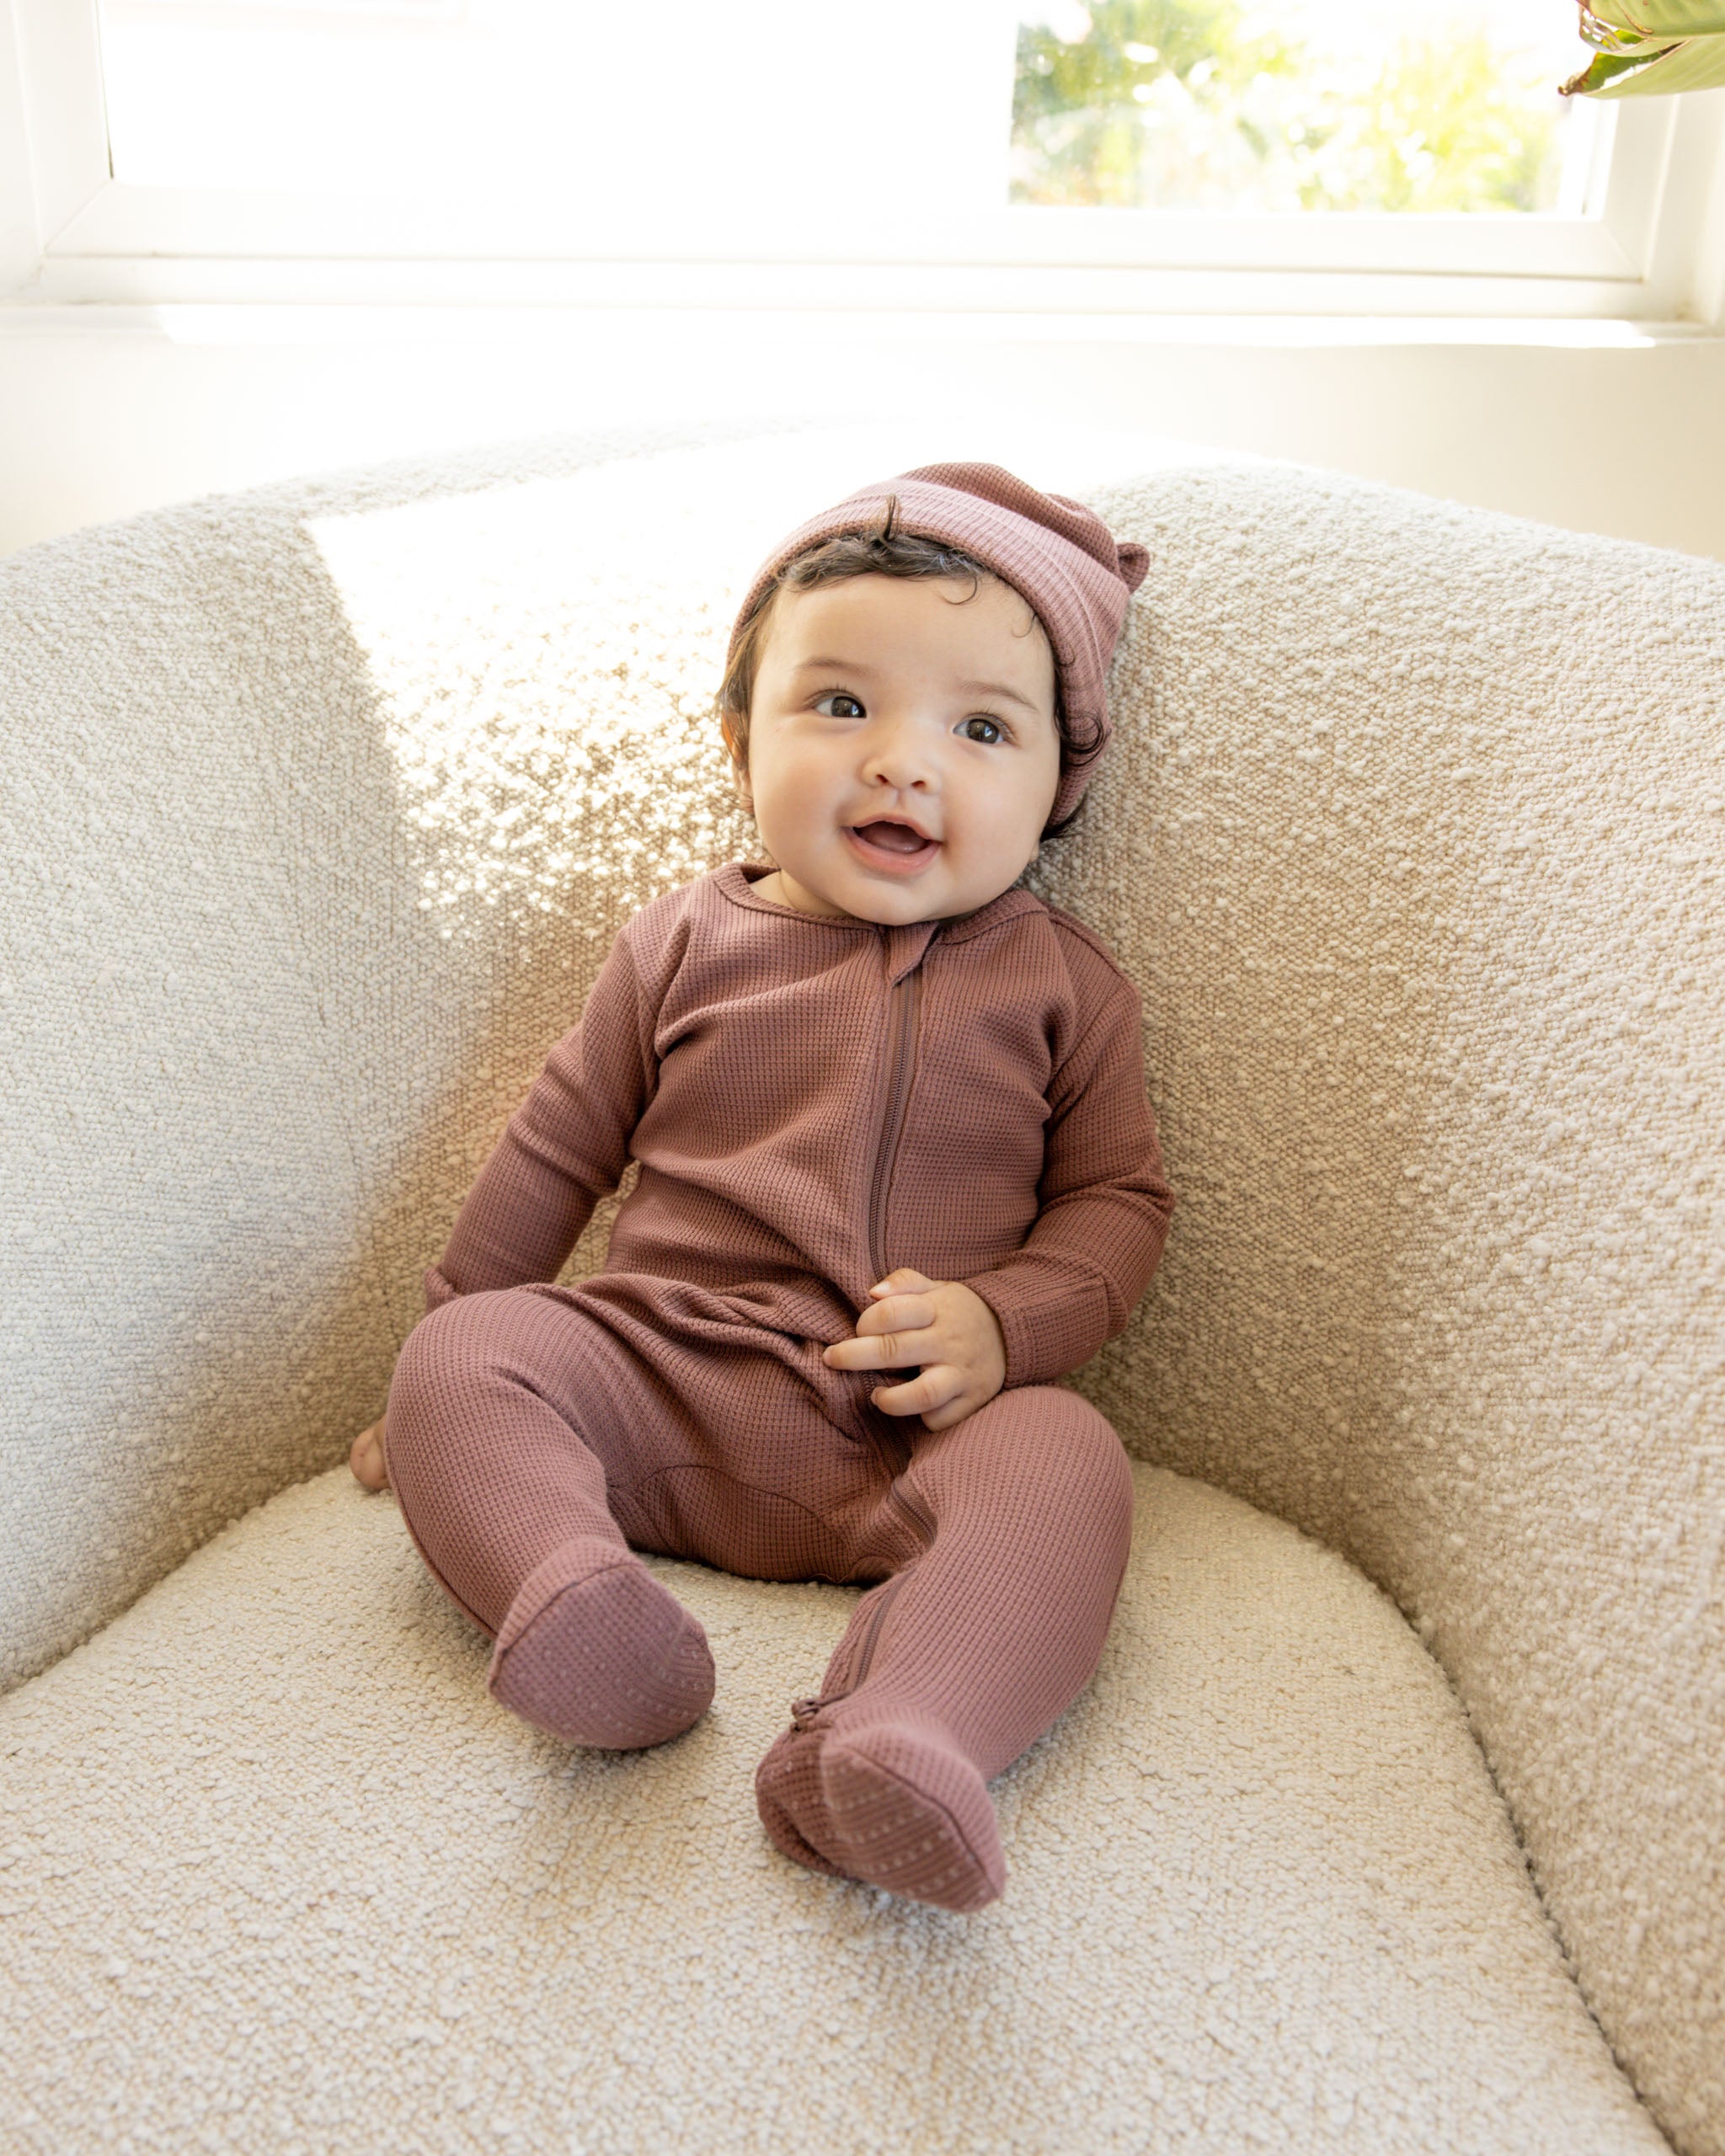 Waffle Sleep Set || Fig - Rylee + Cru | Kids Clothes | Trendy Baby Clothes | Modern Infant Outfits |